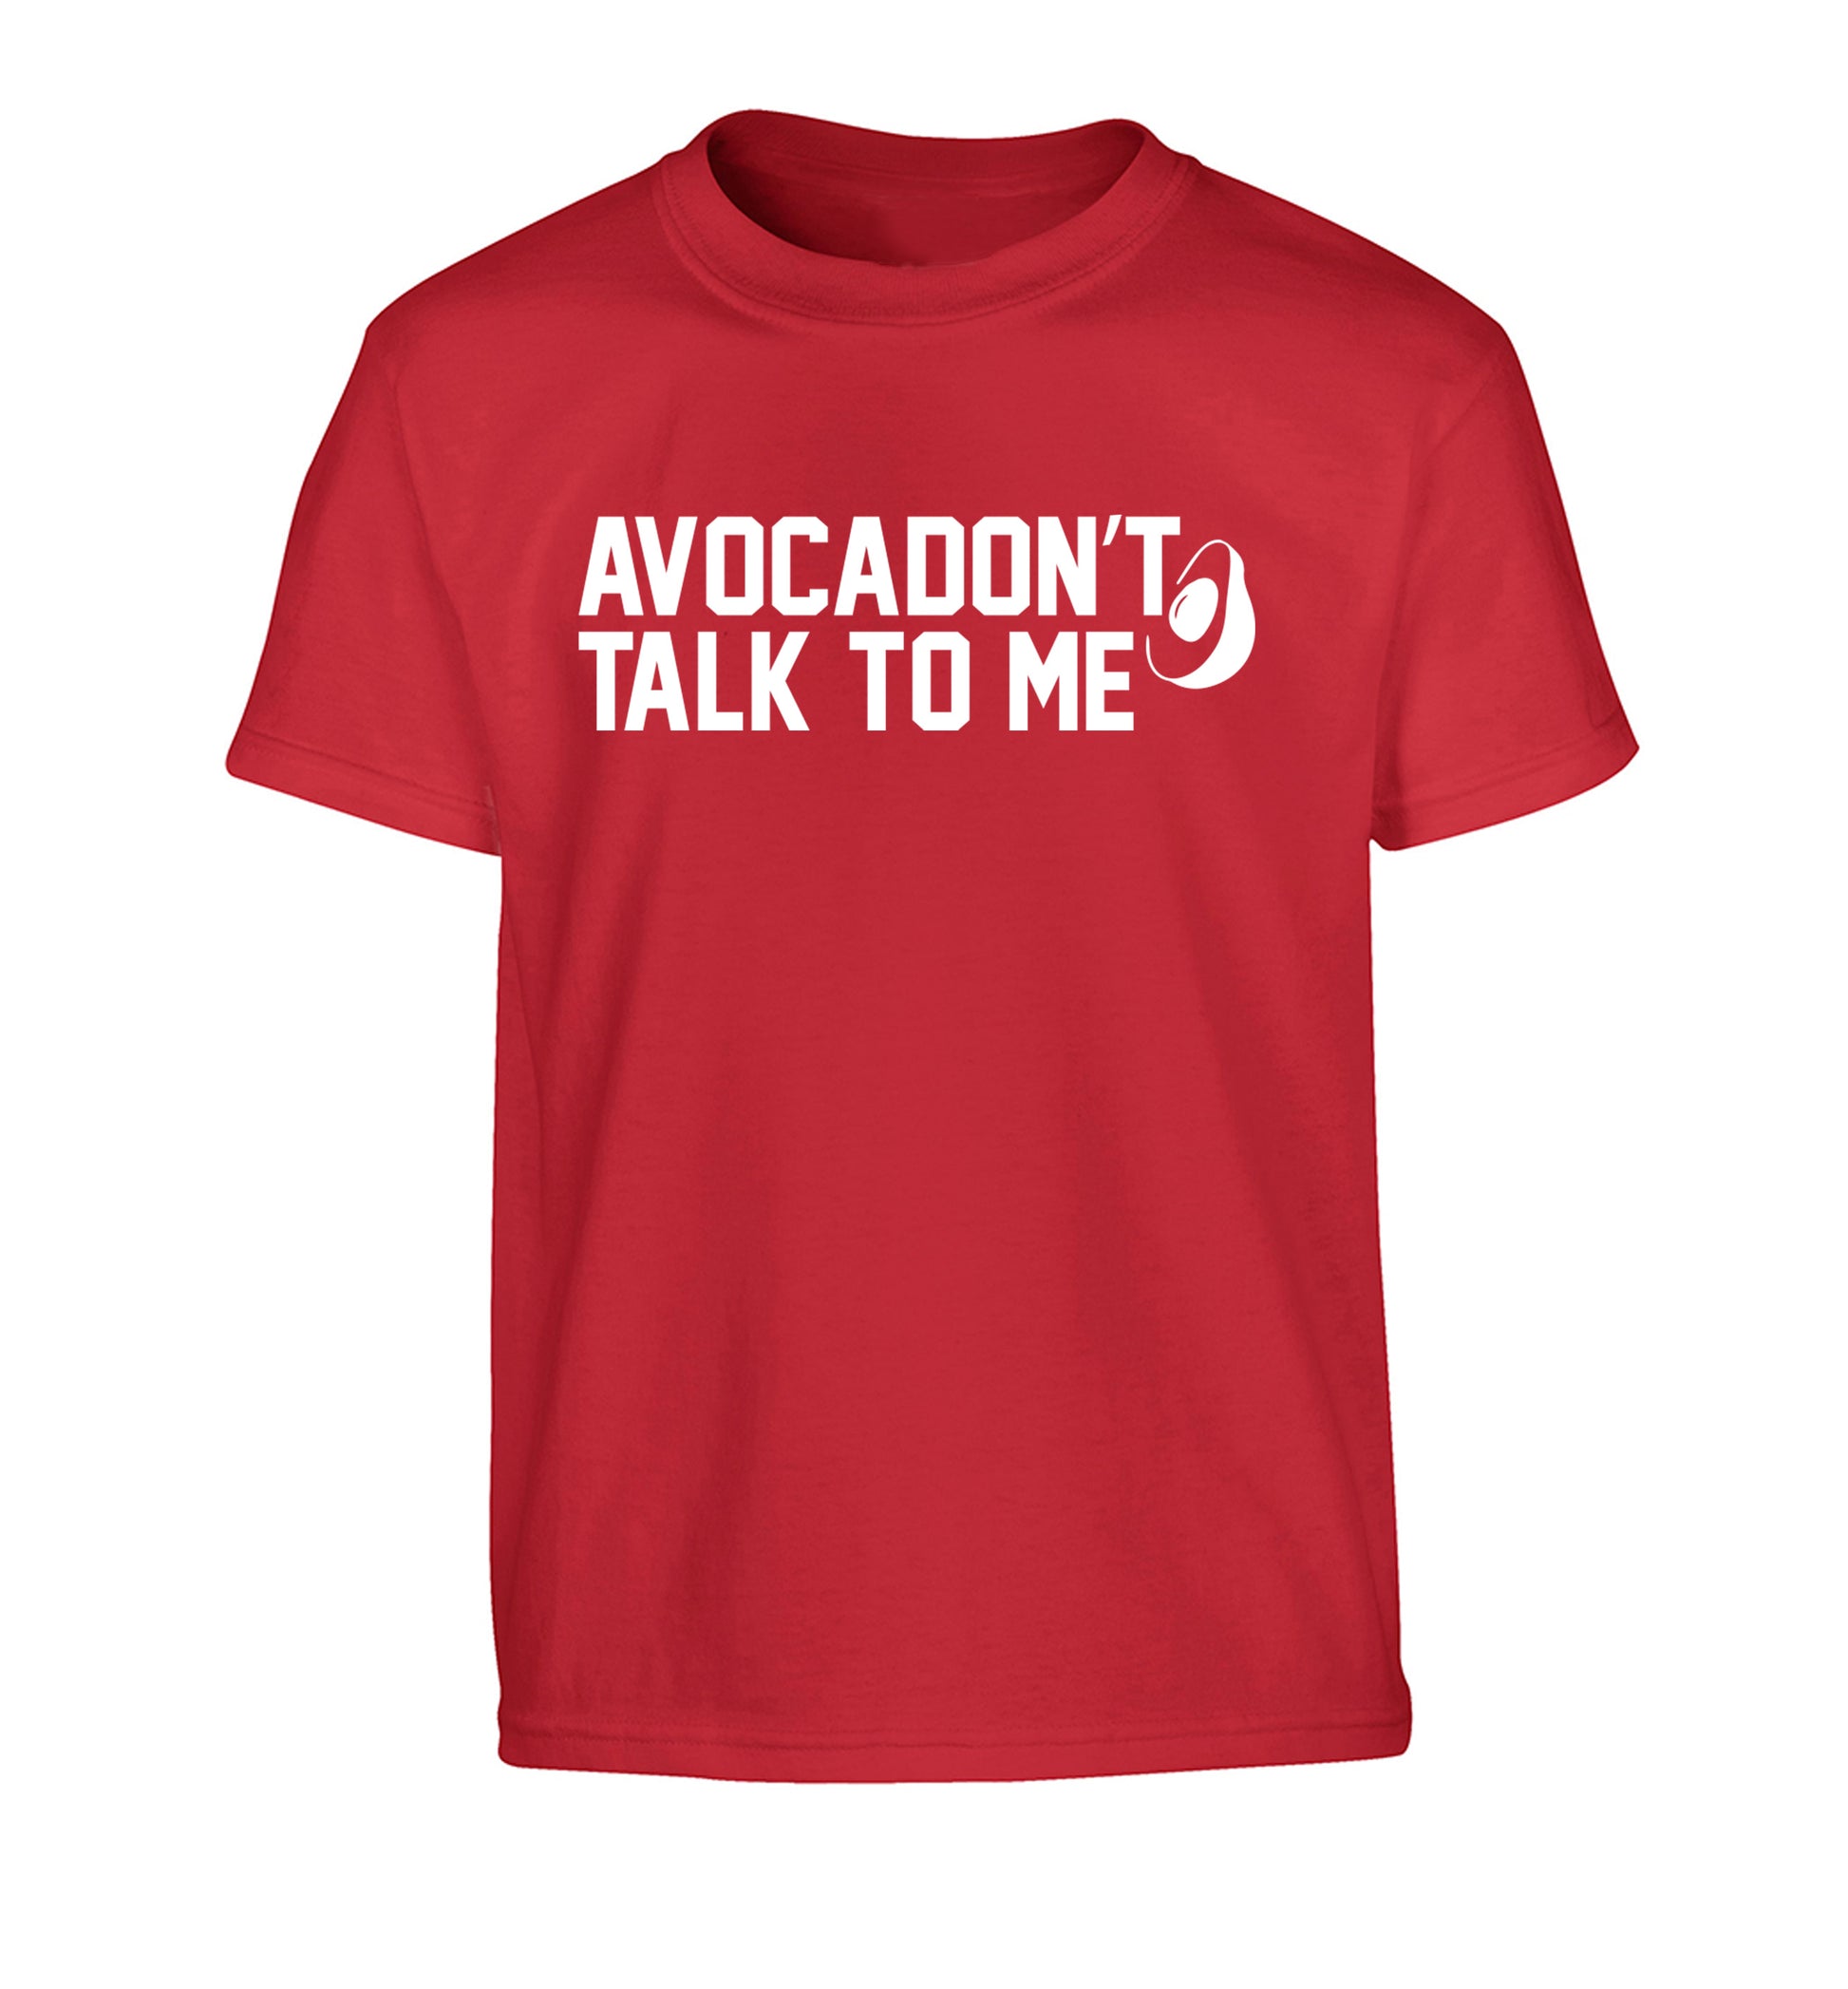 Avocadon't talk to me Children's red Tshirt 12-14 Years